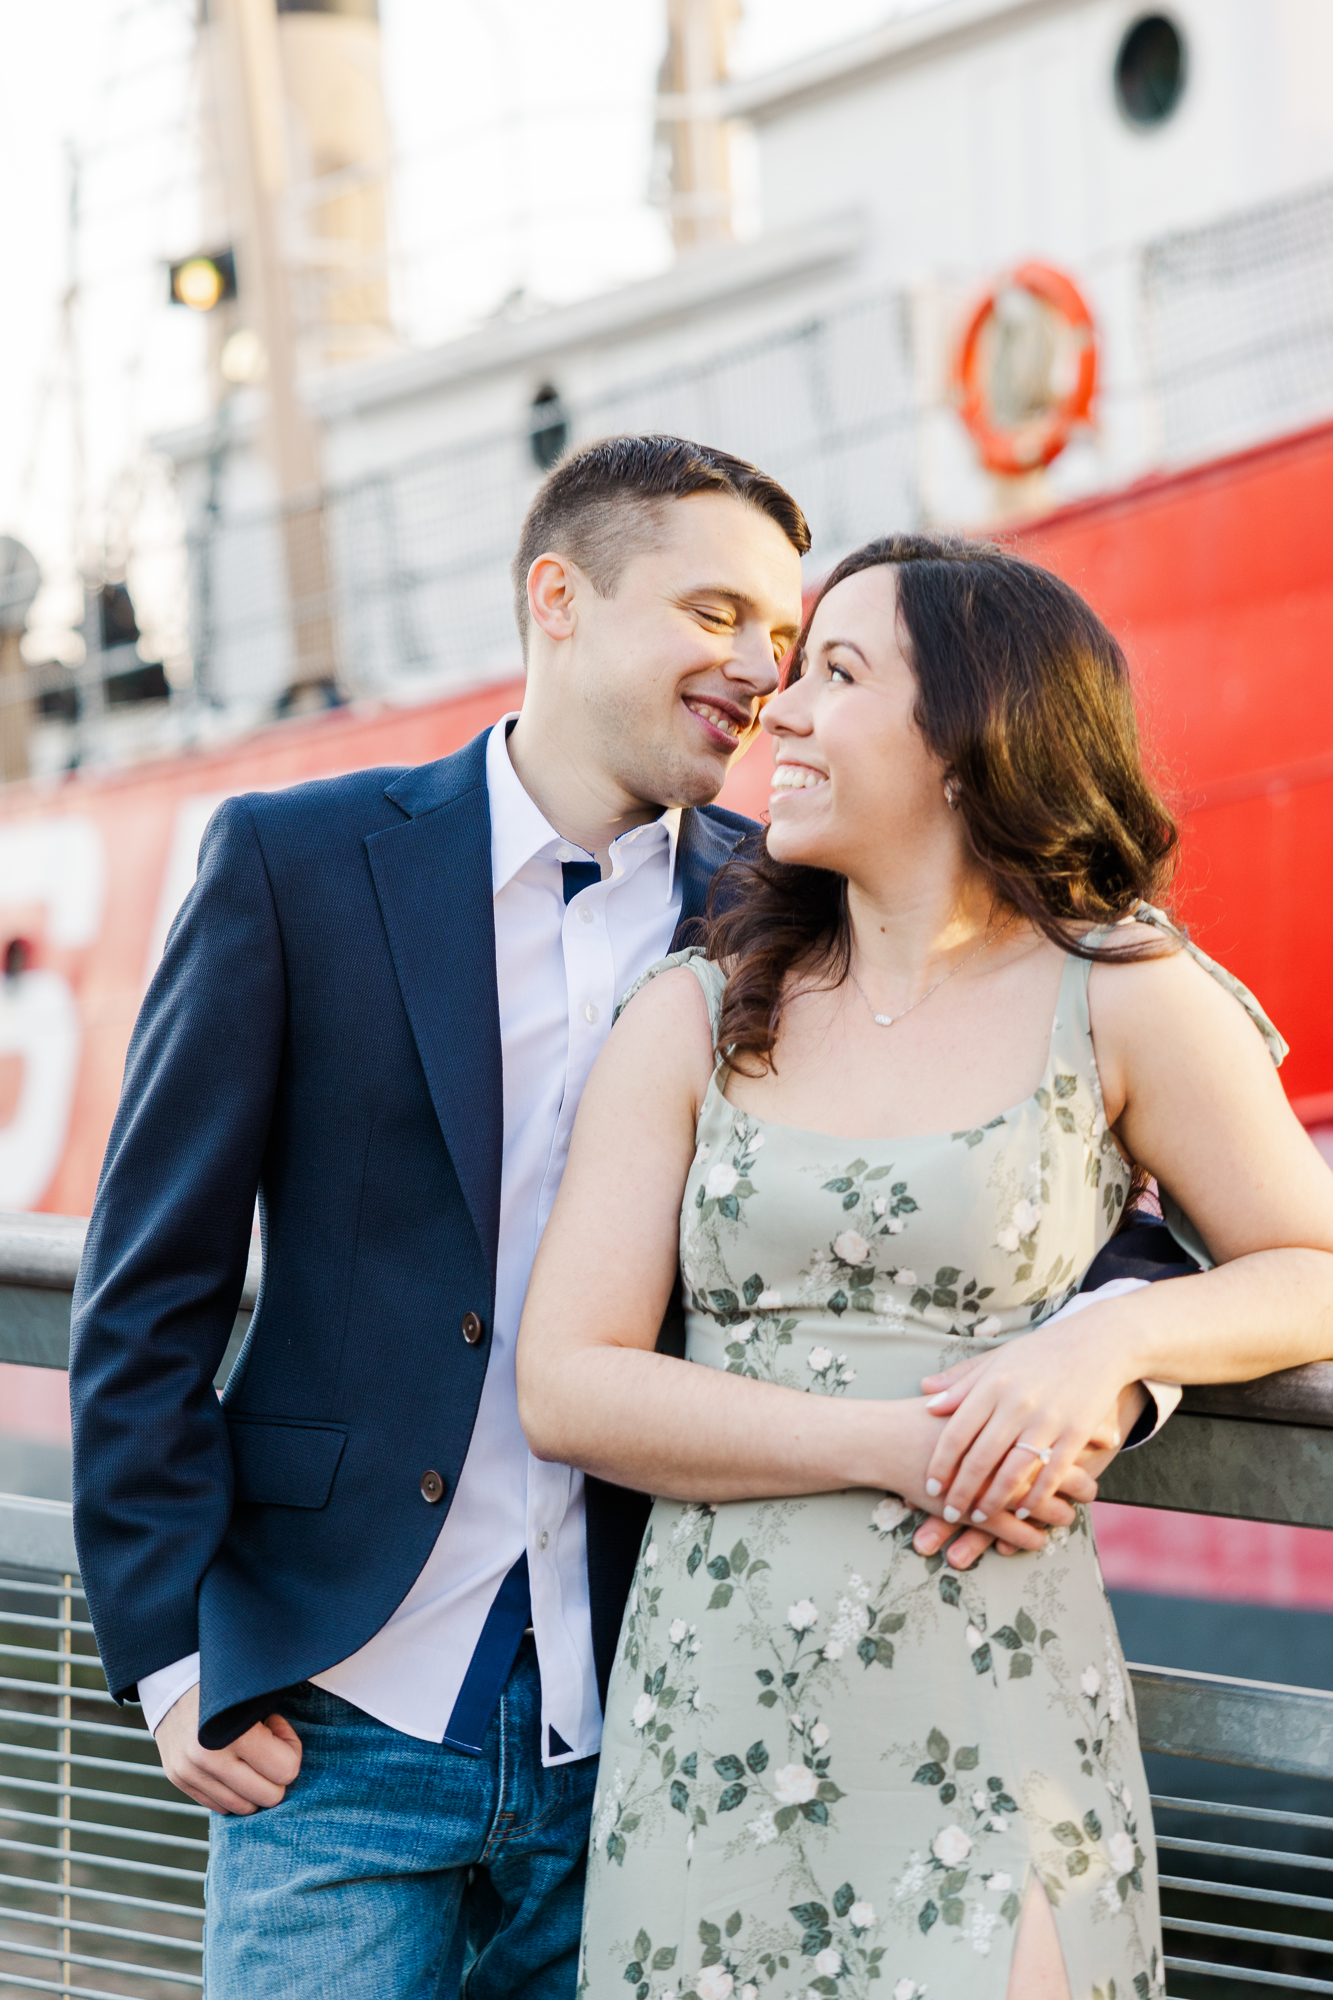 Lovely Brooklyn Bridge and South Street Seaport Engagement Photography